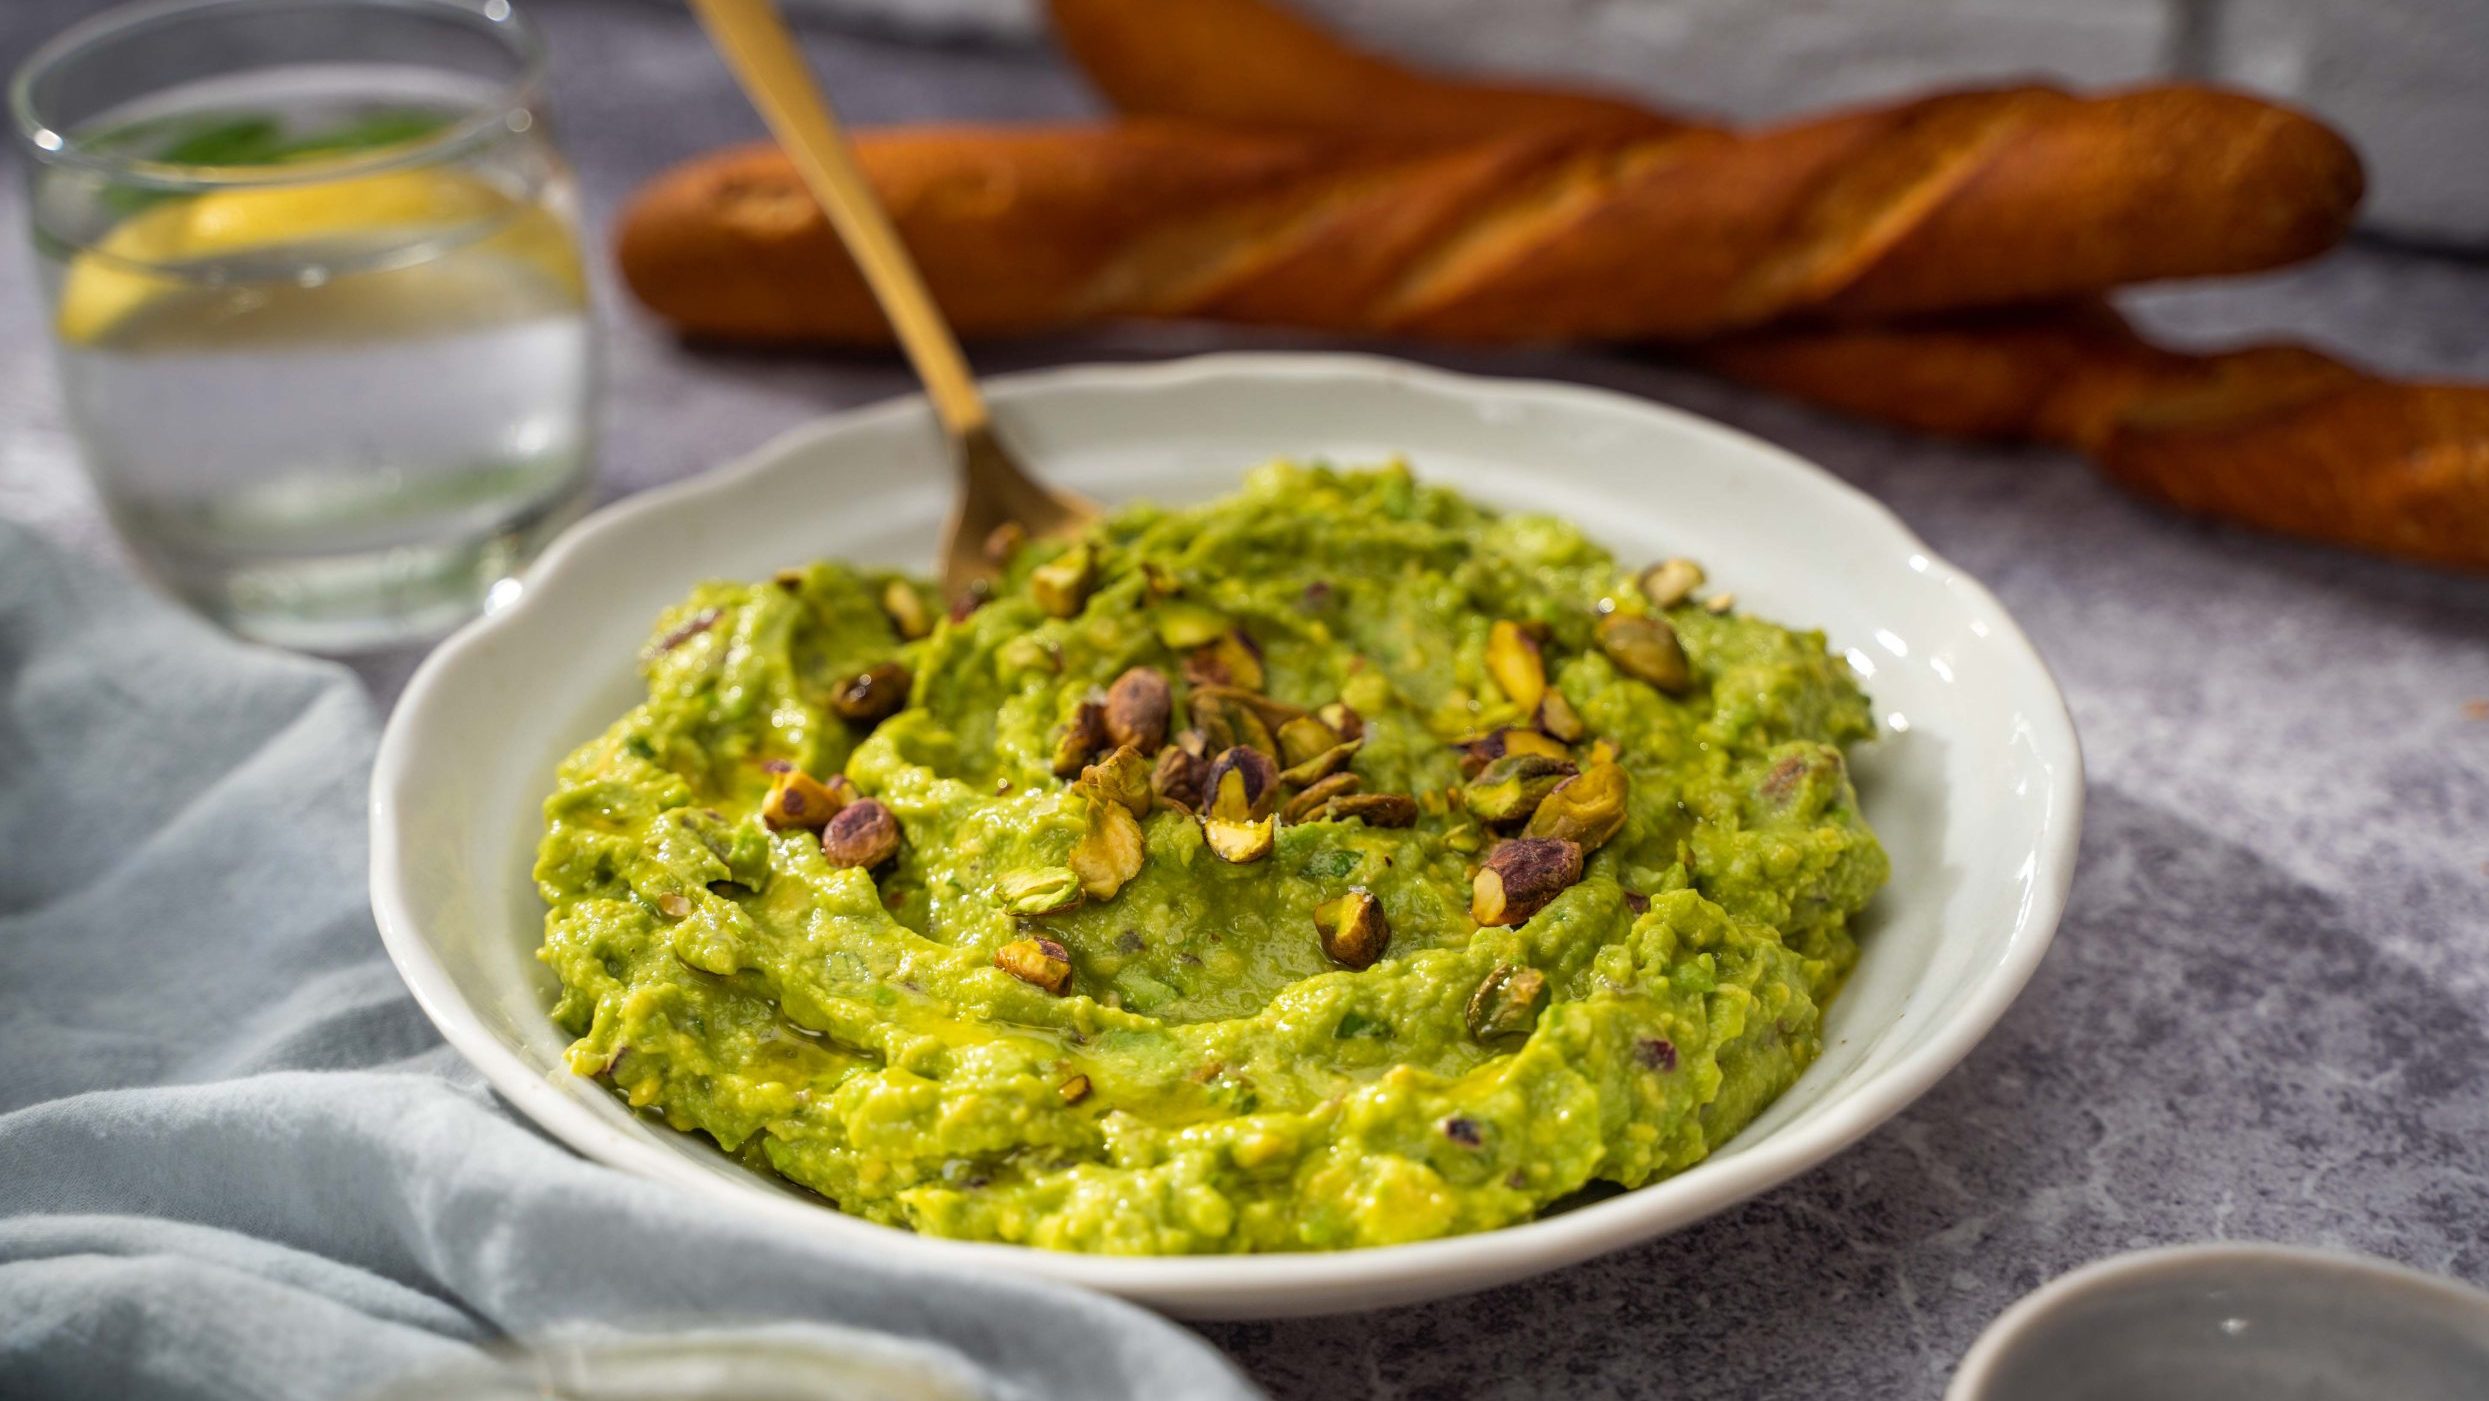 Garlic avocado dip with bread in the background